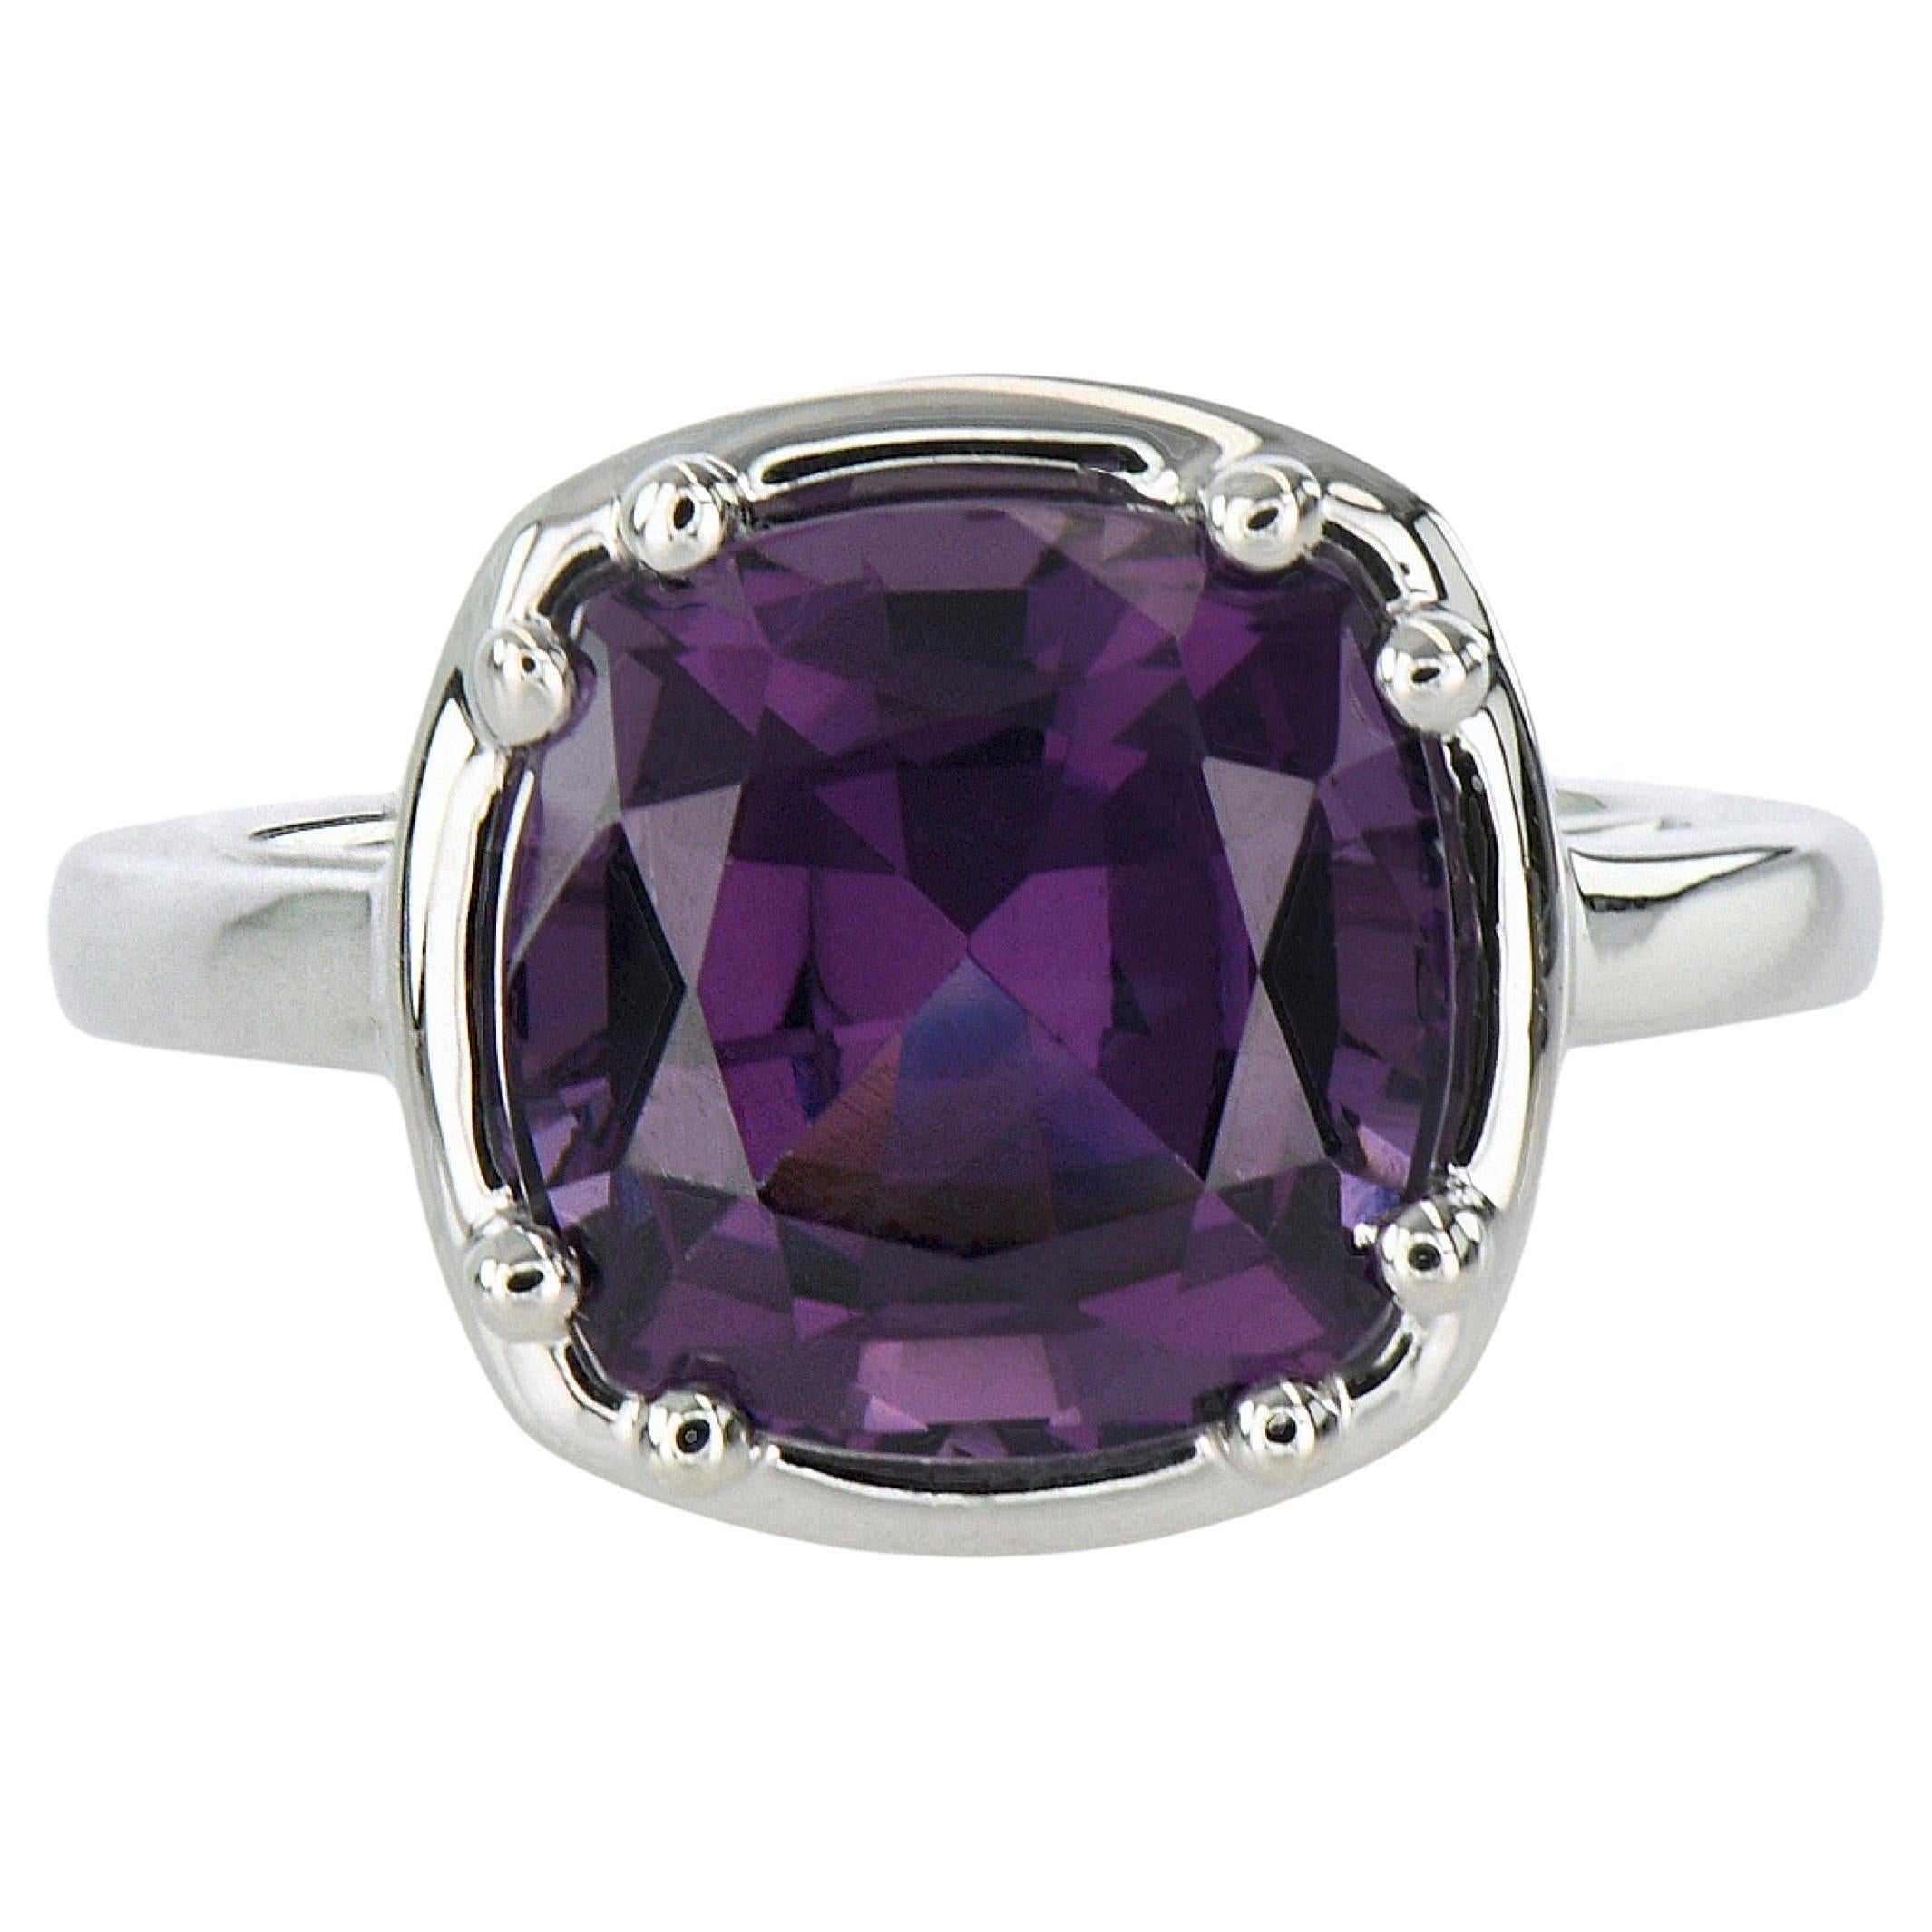 4.89ct Purple Spinel Ring-Cushion Cut-18KT White Gold-GIA Certified-Rare-Unique For Sale